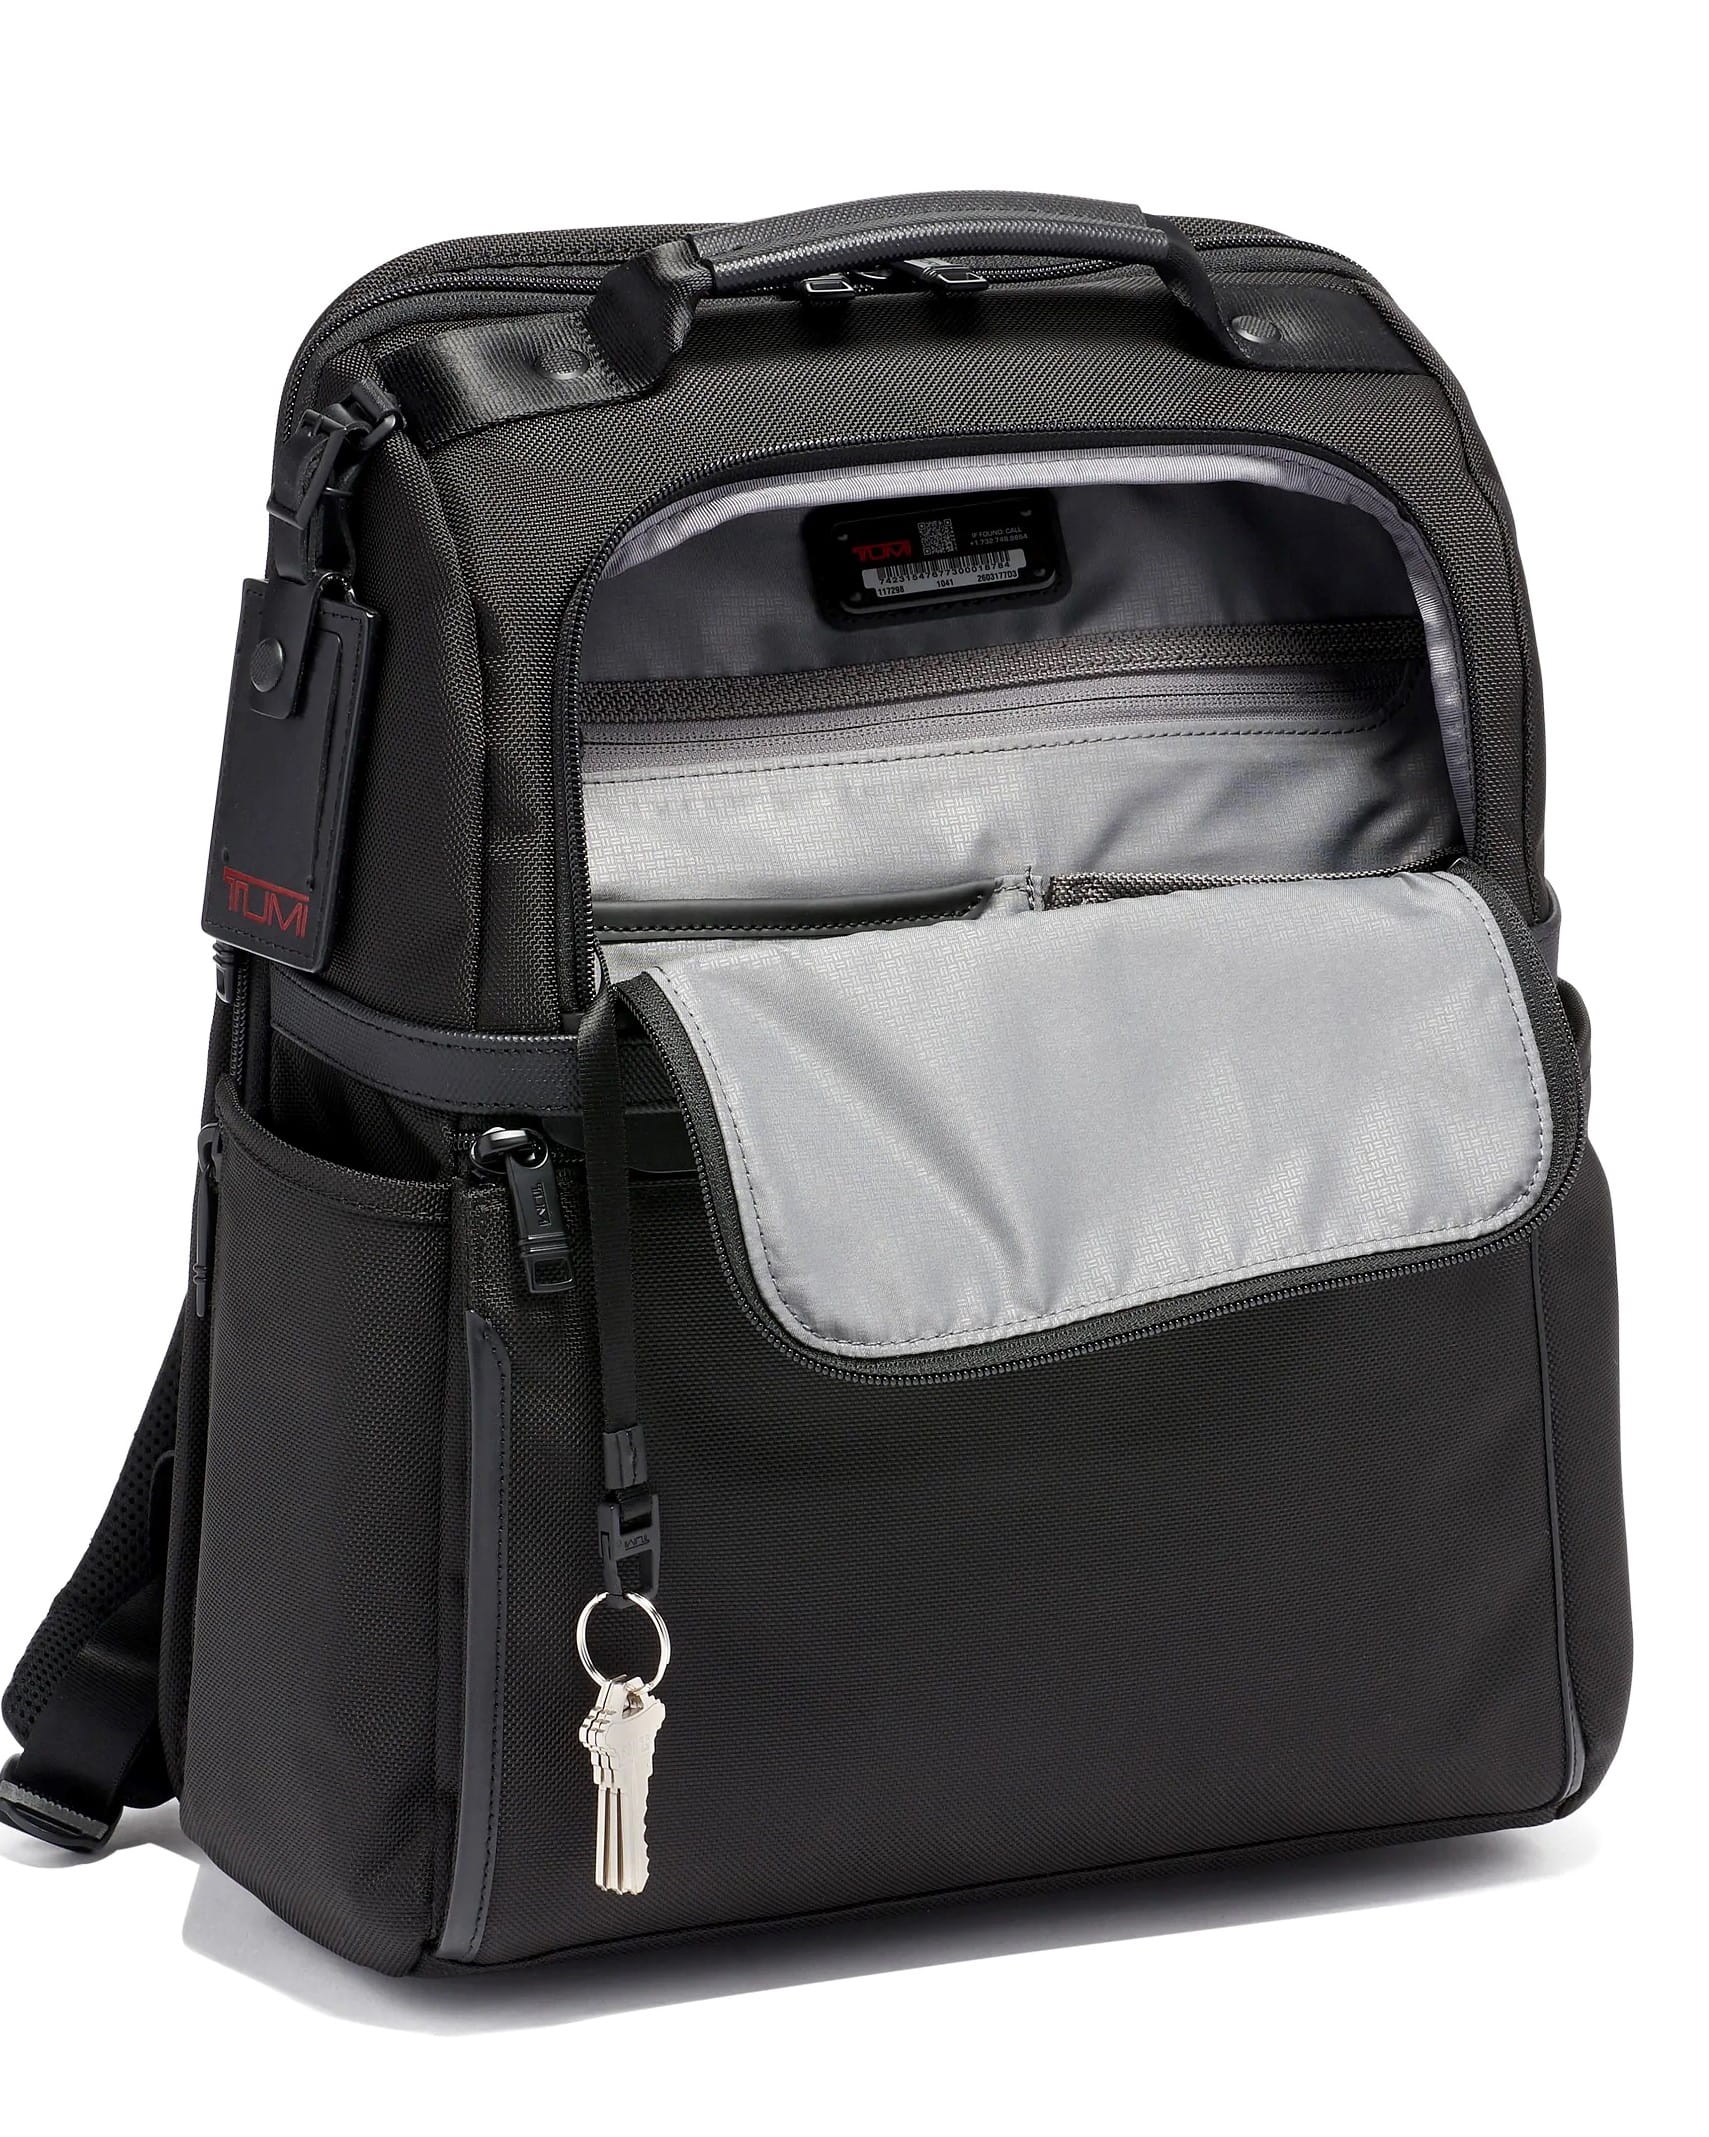 BALO LAPTOP TUMI ALPHA SLIM SOLUTIONS BRIEF PACK BACKPACK 9